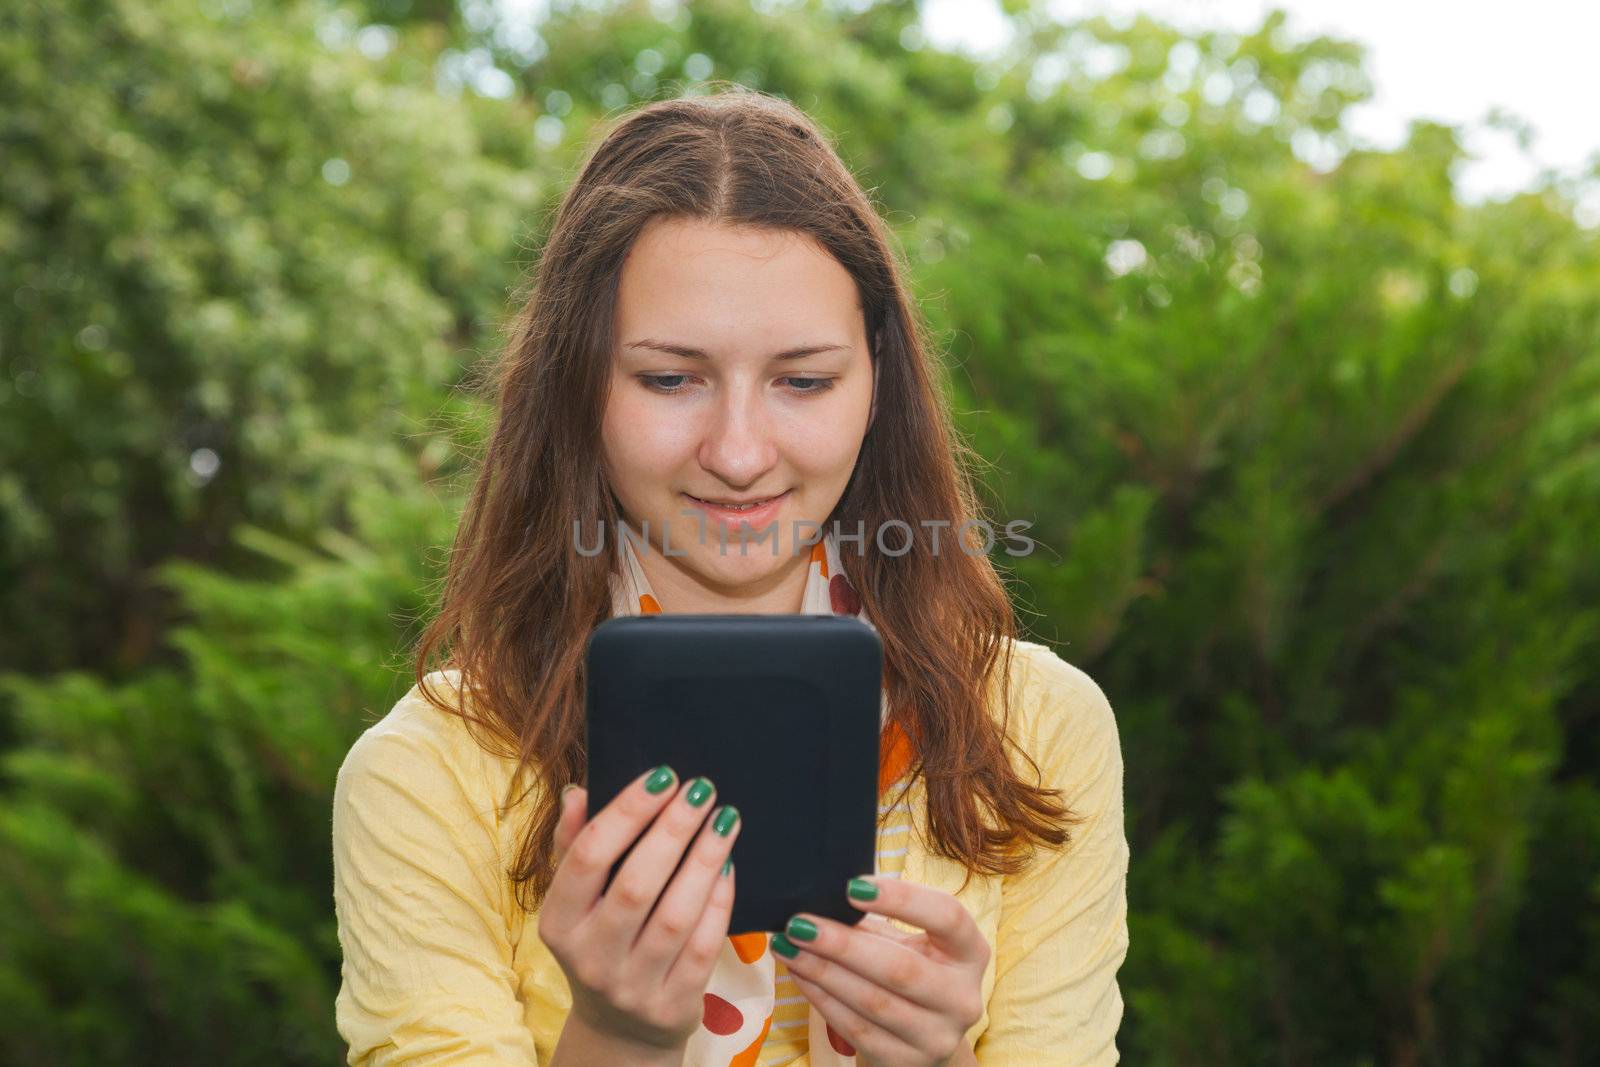 Teen girl reading electronic book by AndreyKr